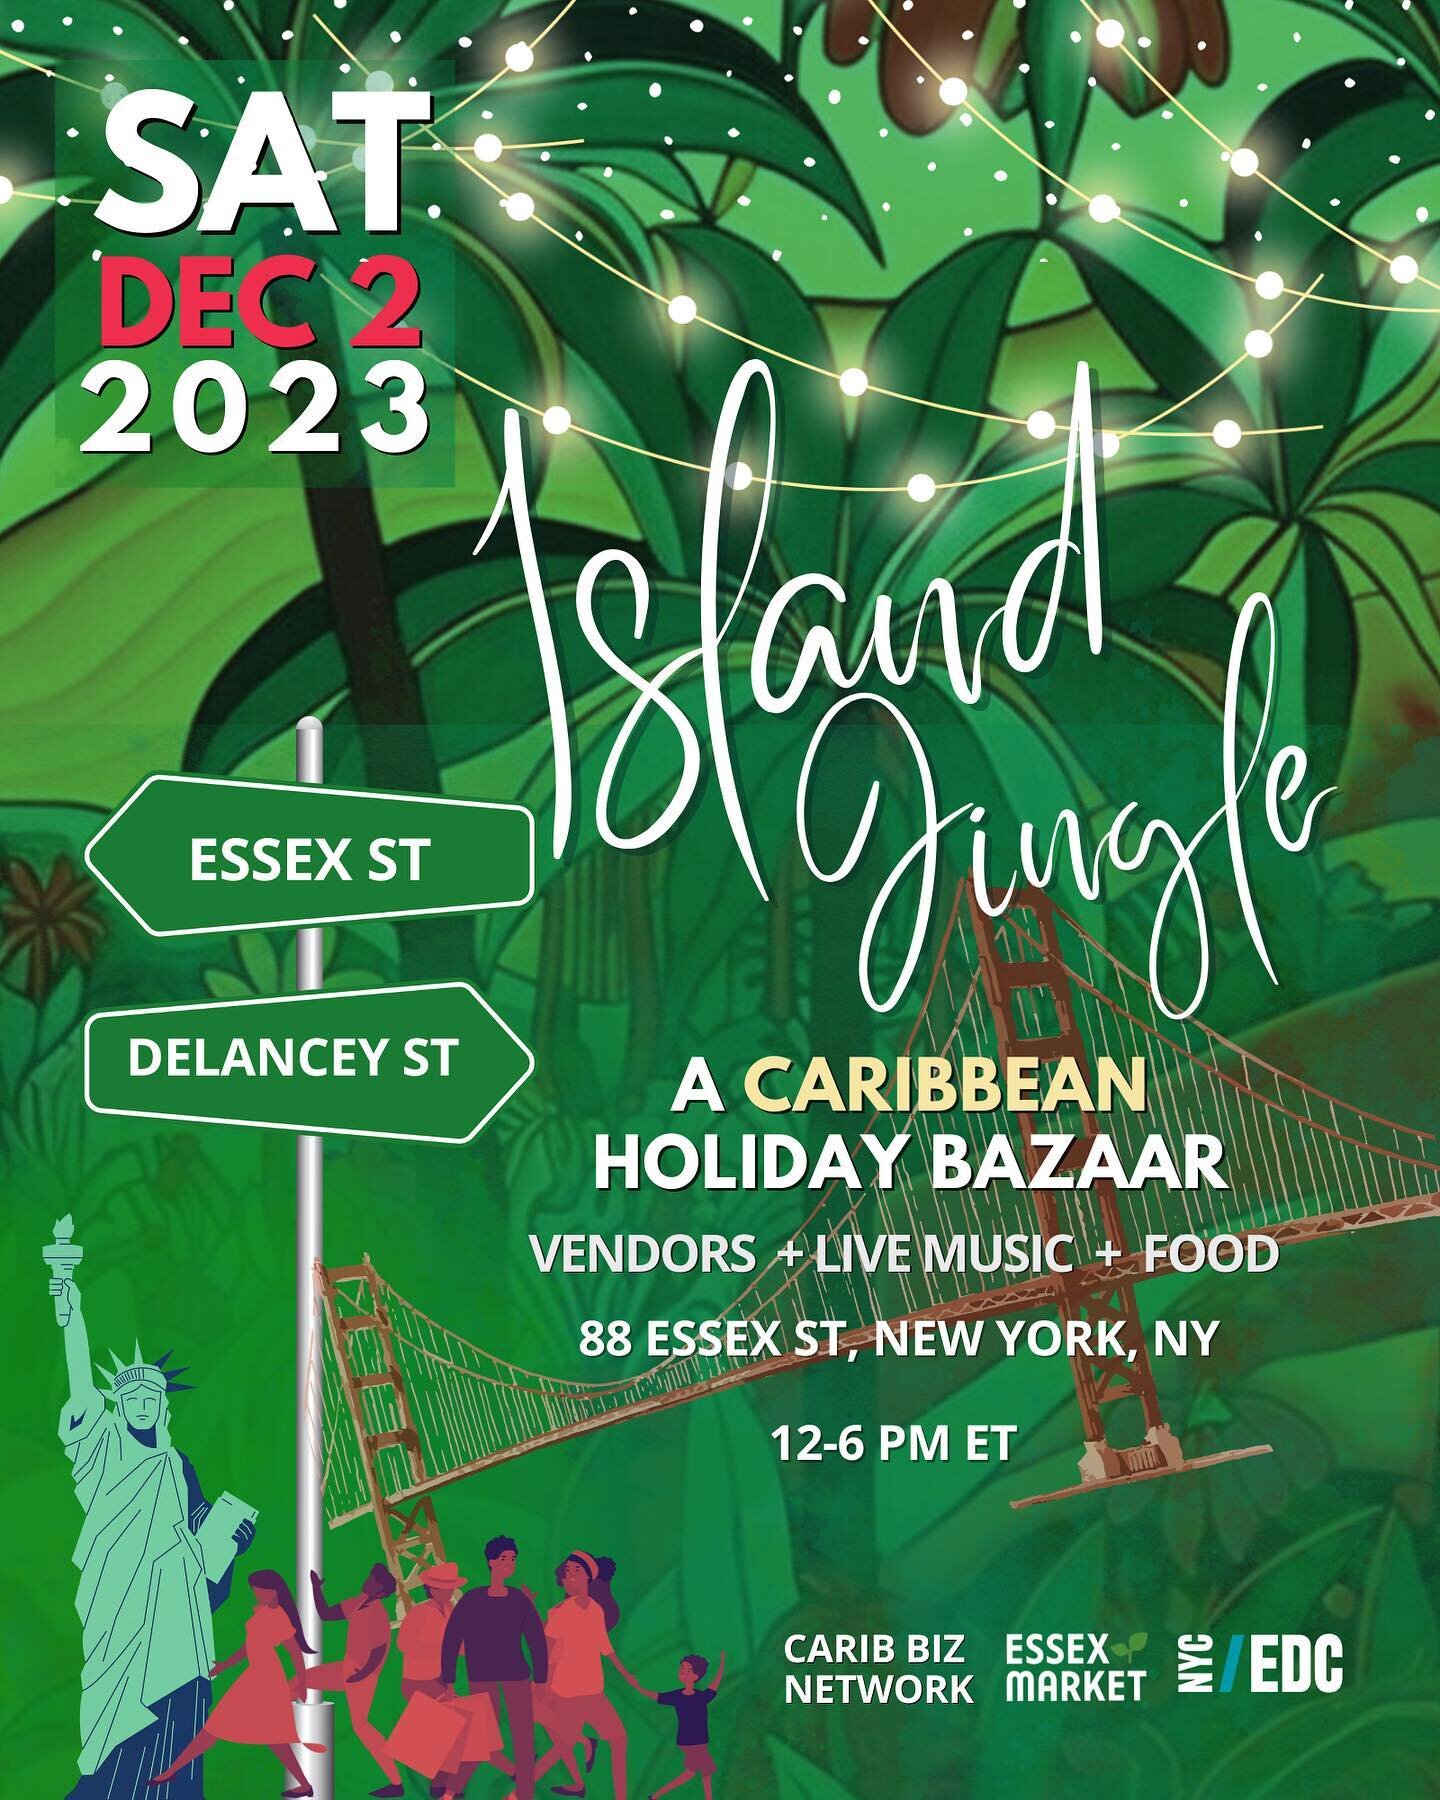 #CBNEvents: Oye - Wi B A C K ‼️ CBN Island Jingle is just three Saturdays away &amp; back for a  third beautiful year of festive Caribbean vibes in the heart of NYC! 

This is a completely FREE experience in partnership with @nycedc that we curate fo